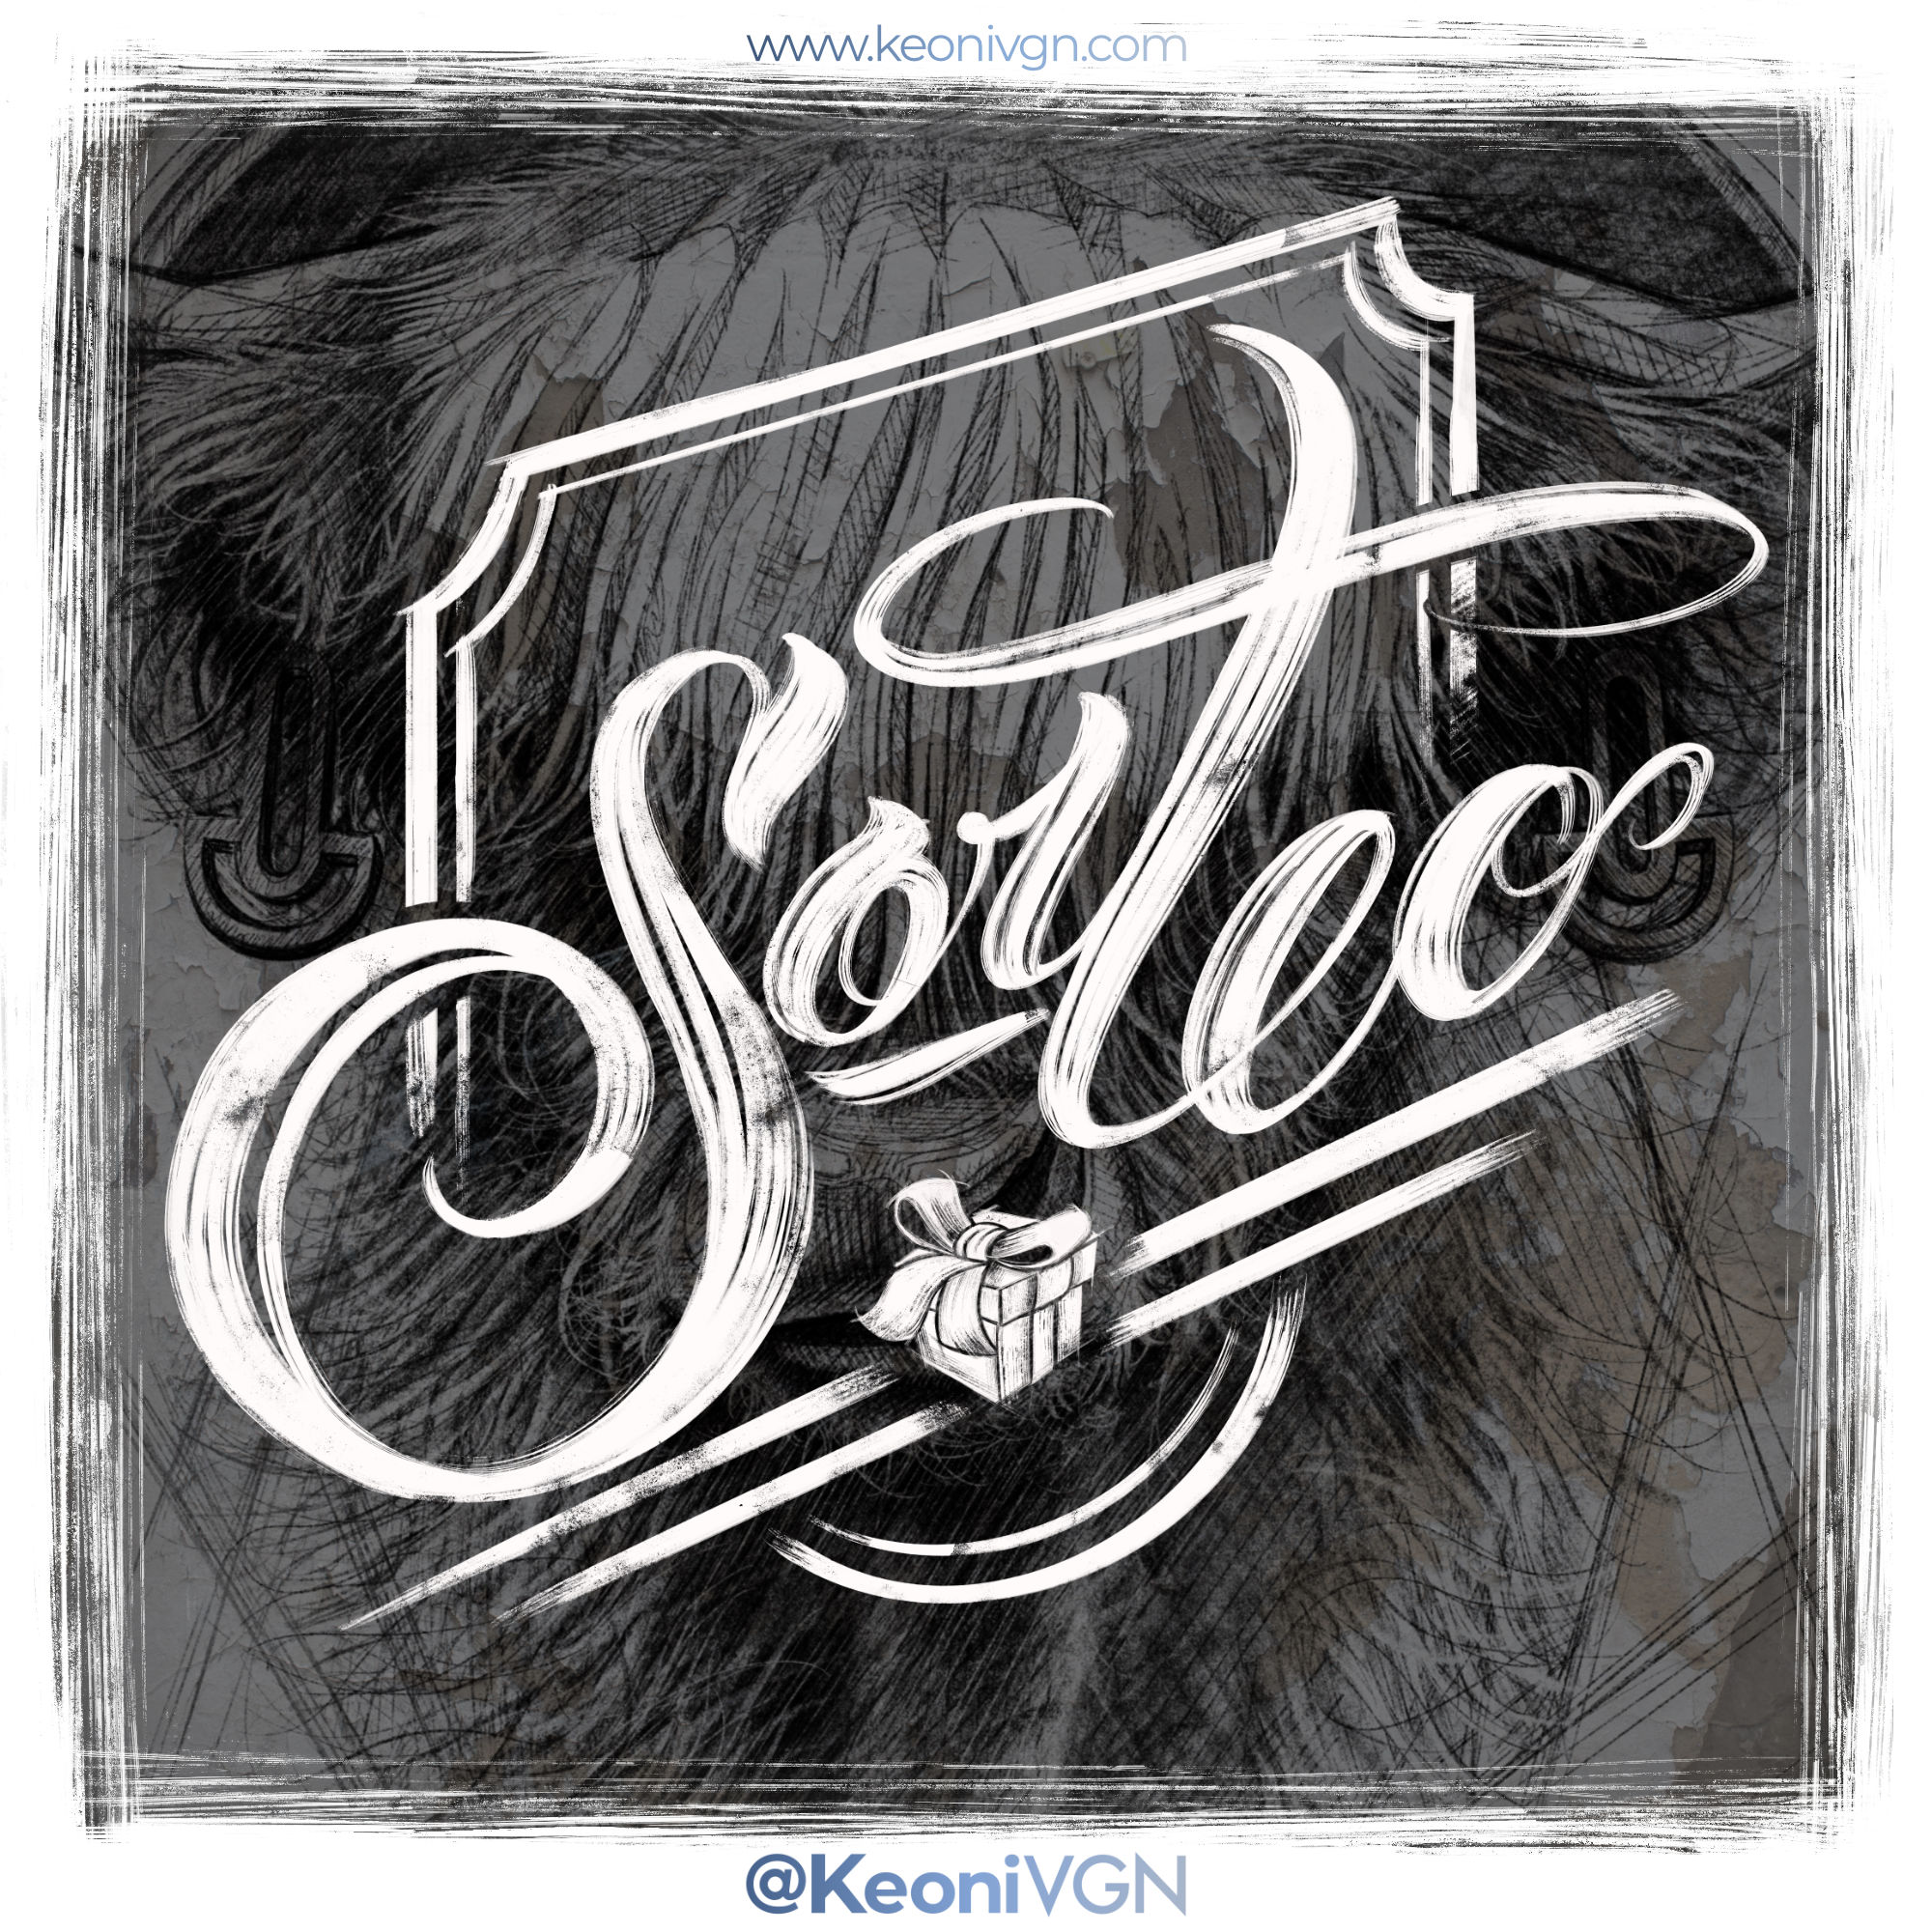 proyecto LETTERING SORTEO KEONI VGN